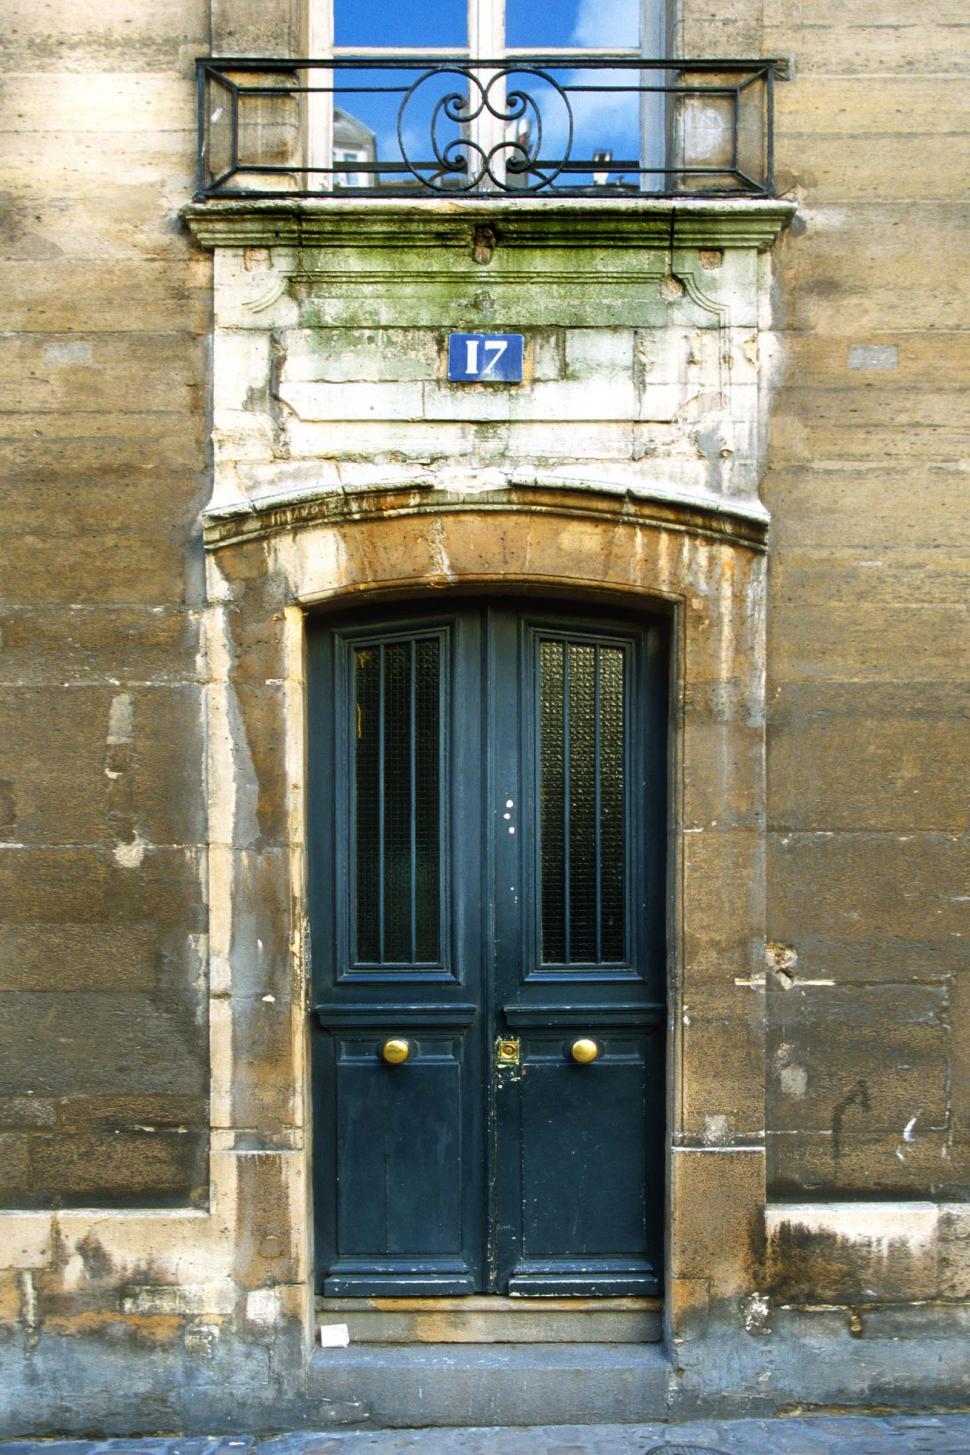 Free Image of door doorway european europe france french balcony entryway entrance stone old seventeen 17 address weathered 